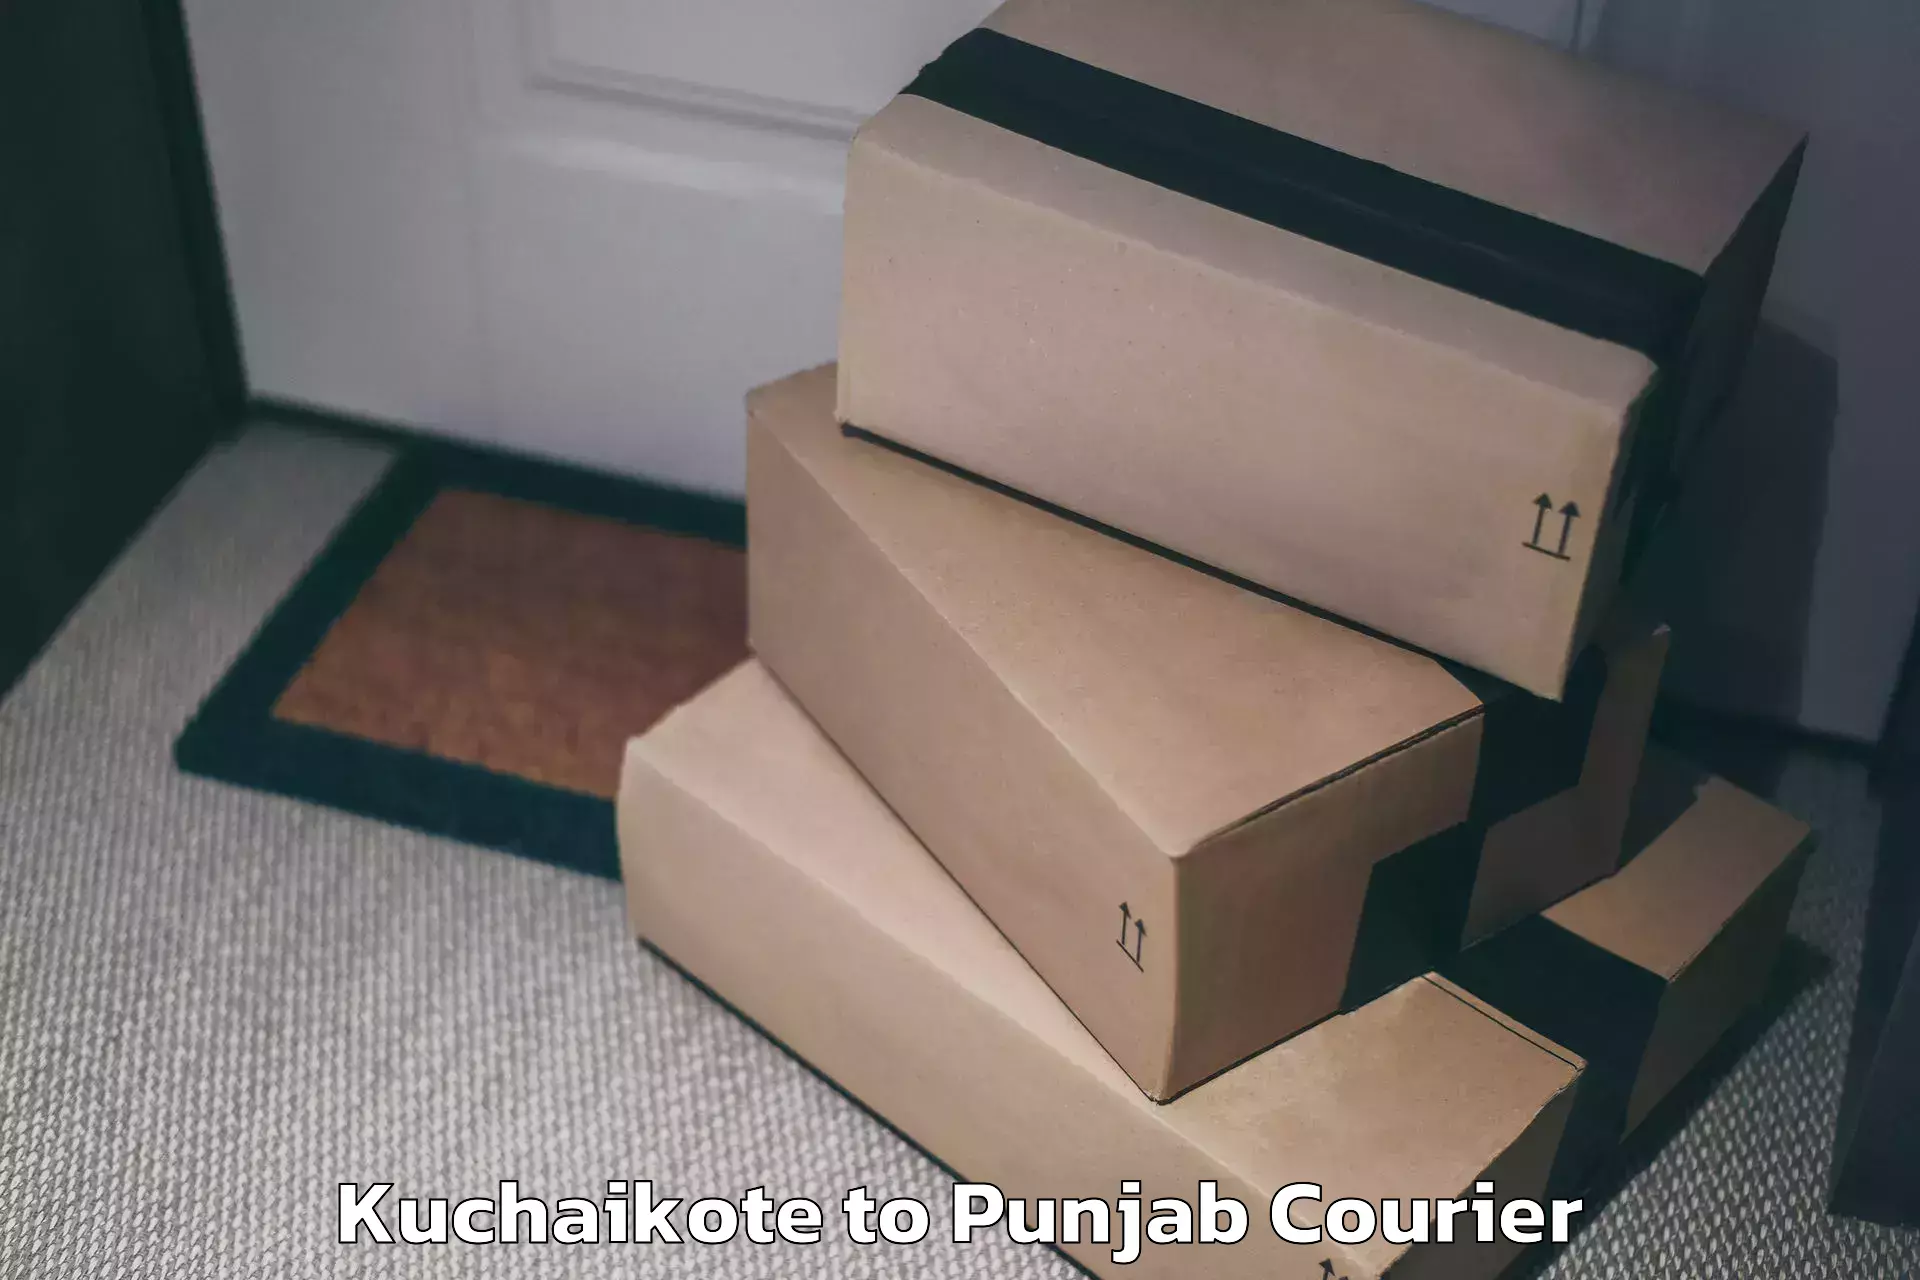 Luggage delivery providers Kuchaikote to Punjab